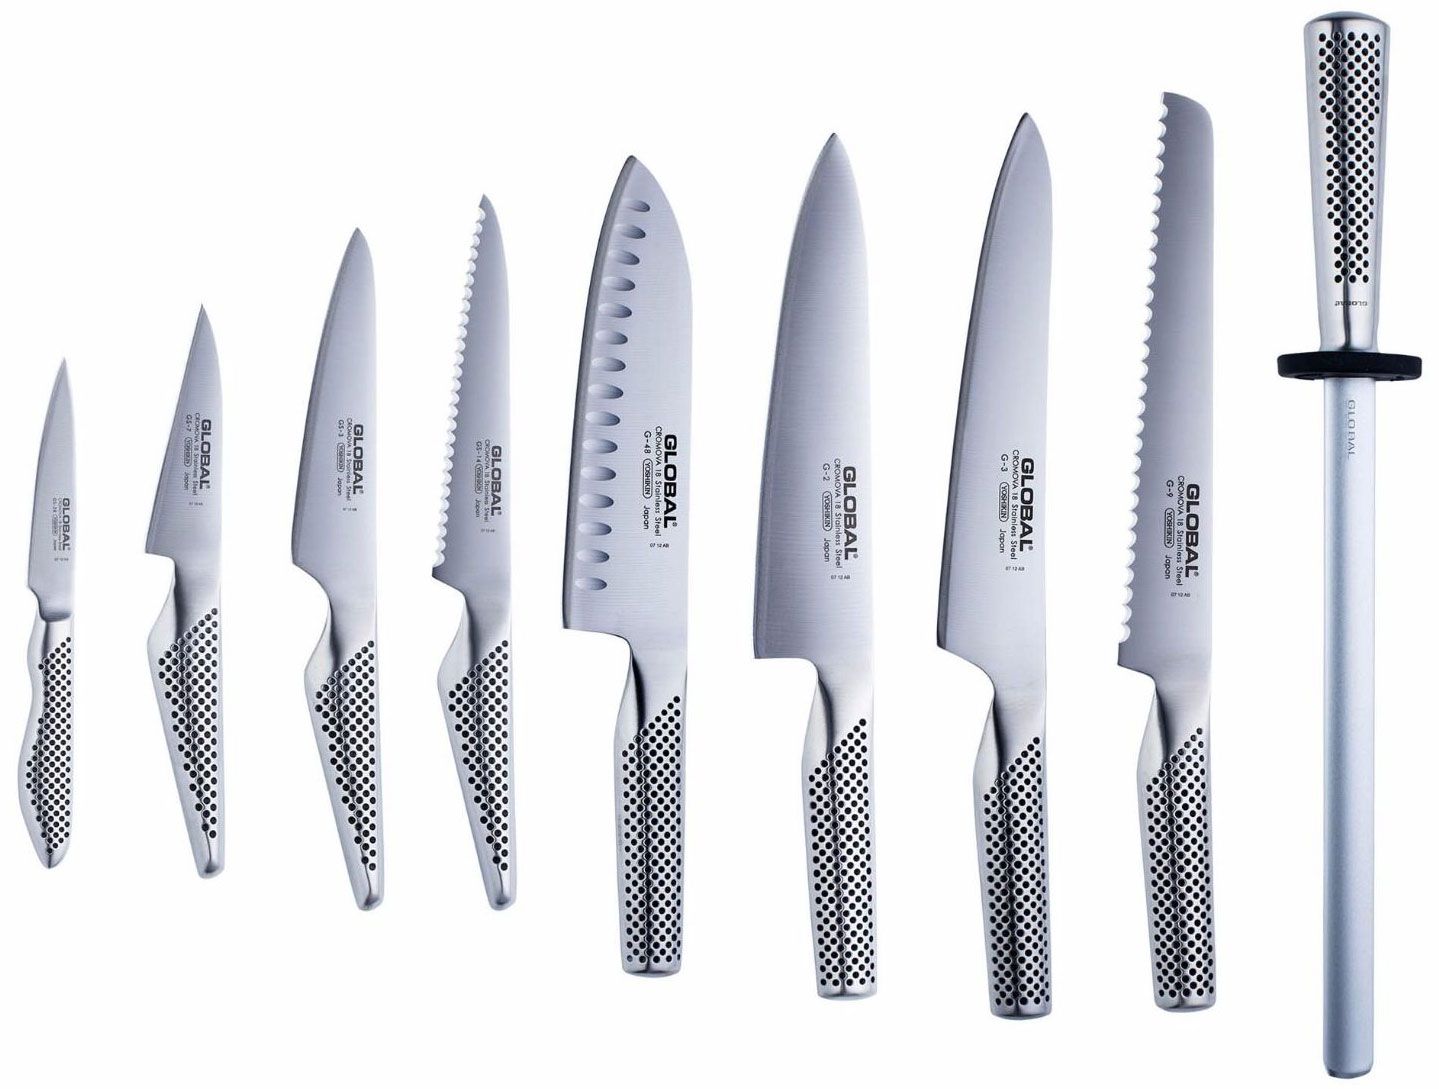 Global Classic Stainless Steel 3-Piece Knife Set 